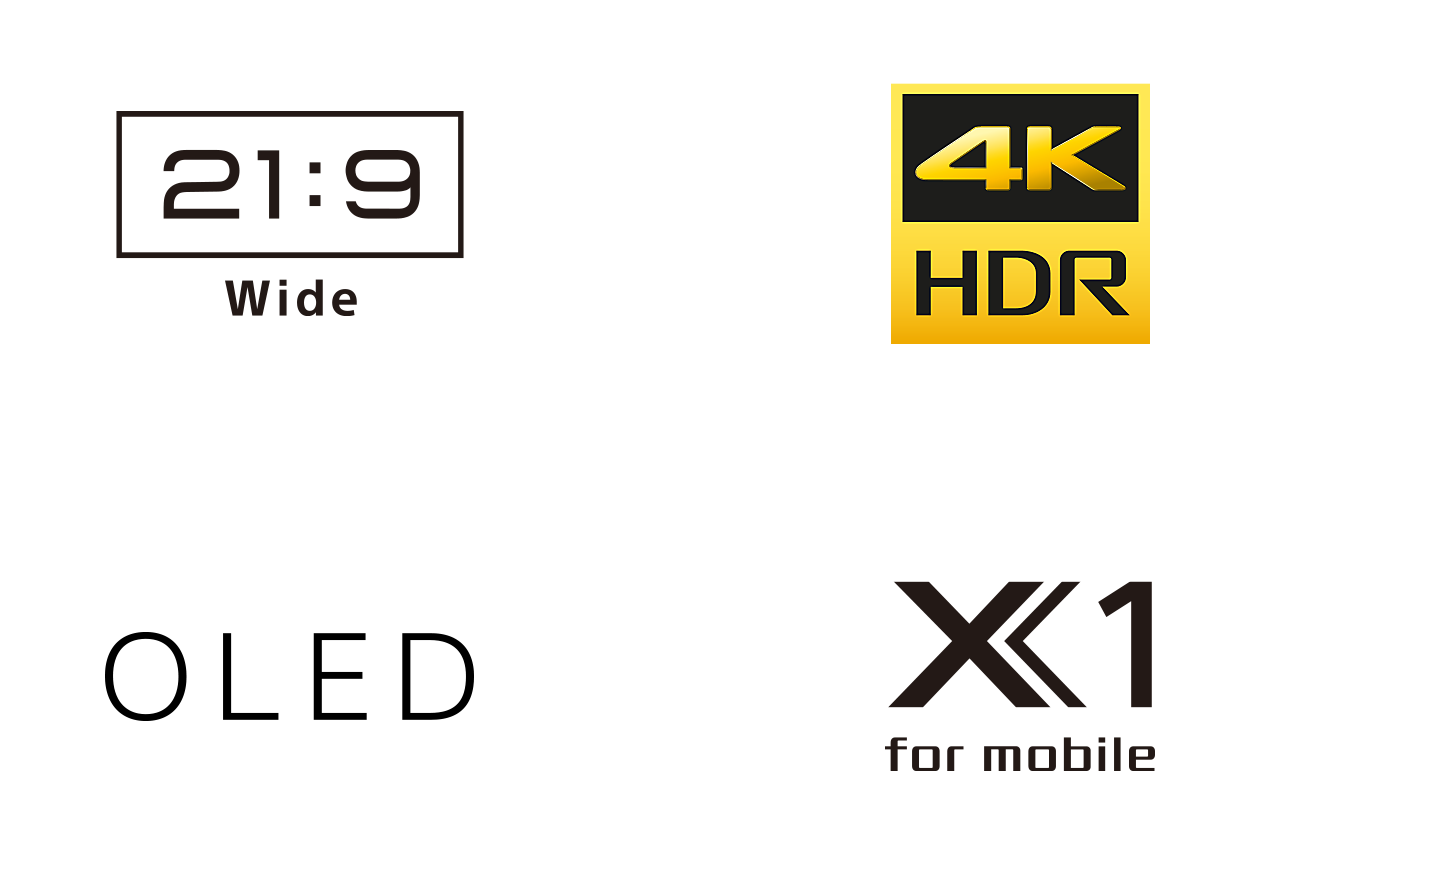 Logos for 21:9 Wide, 4K HDR, OLED, and X1 for mobile